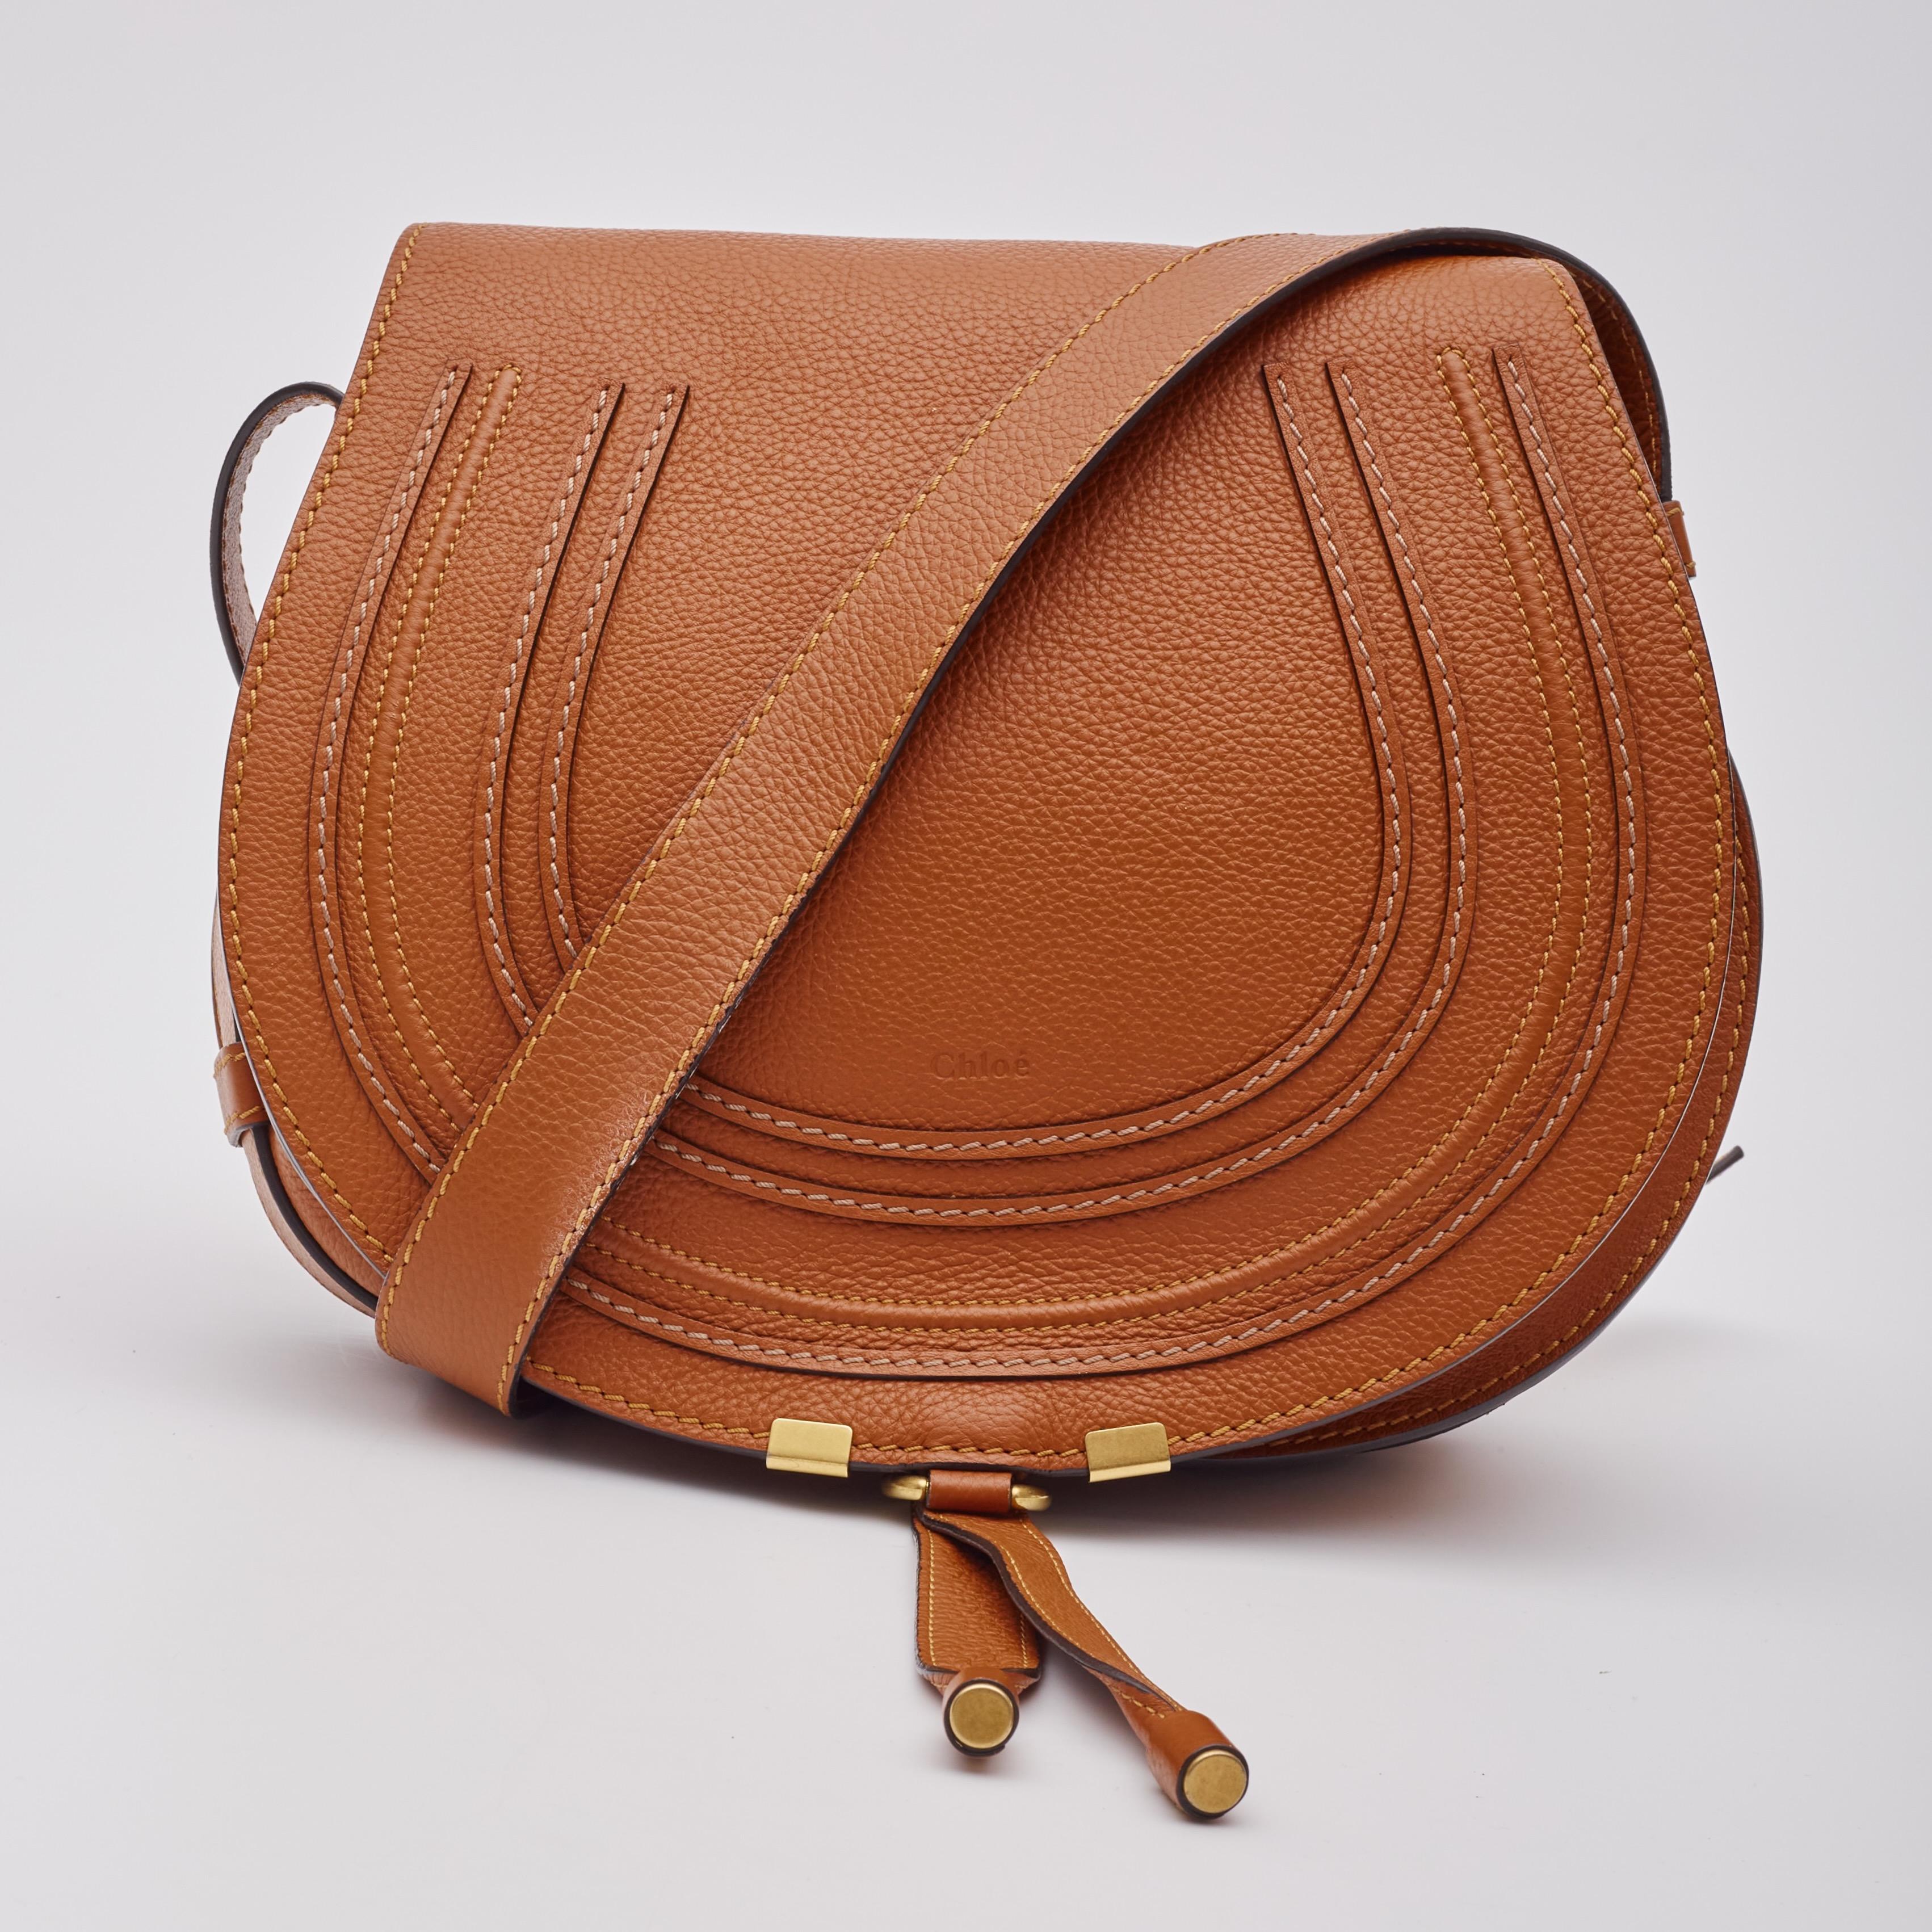 Chloe Caramel Leather Marcie Crossbody Bag Medium In Excellent Condition For Sale In Montreal, Quebec